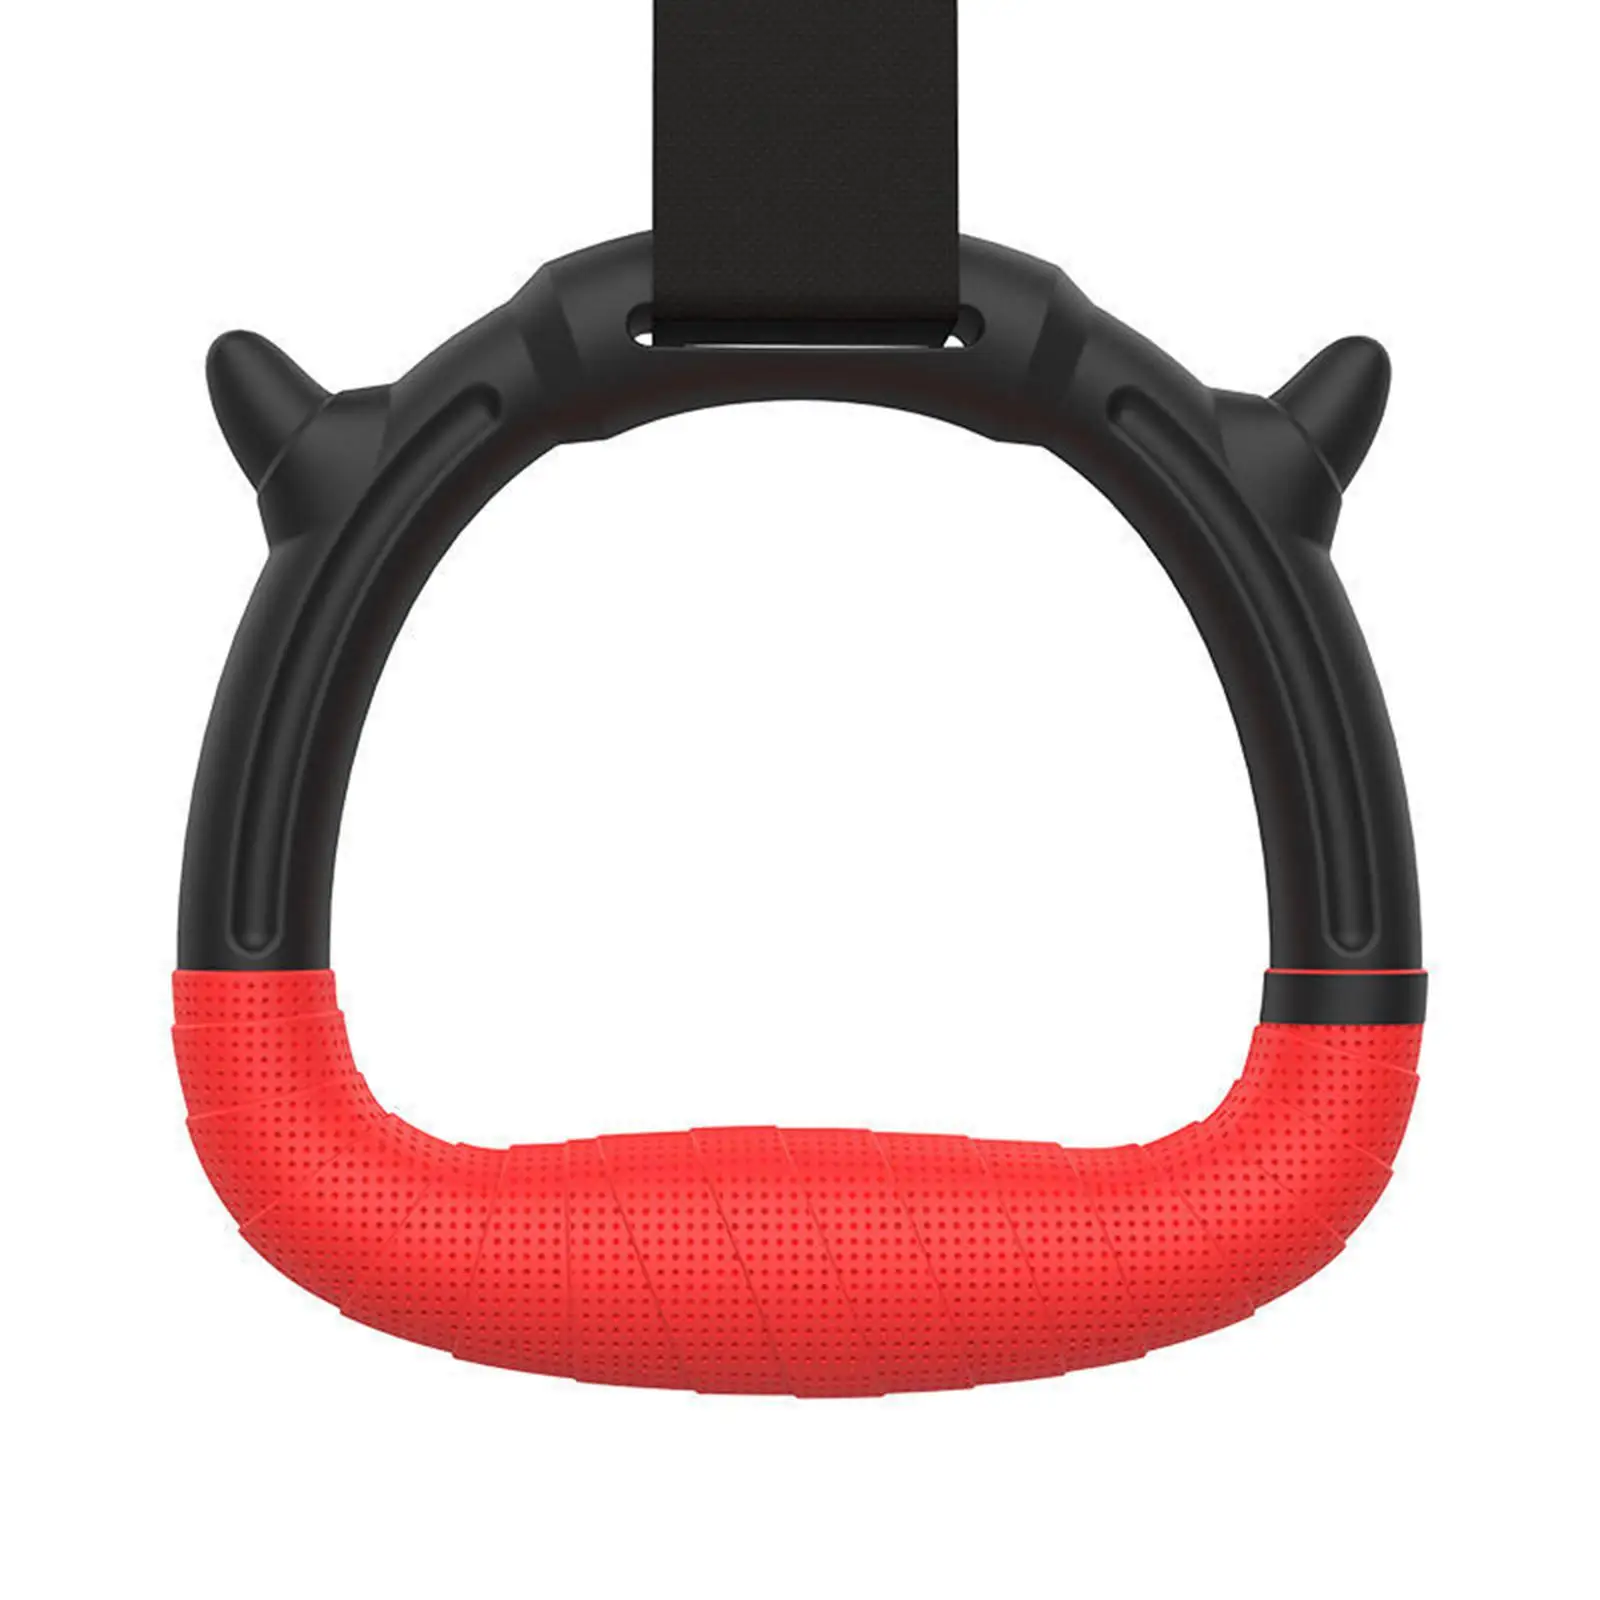 Gymnastics Rings Adjustable Strap Gym Ring for Home Gym Workouts Beginners Kids Adult